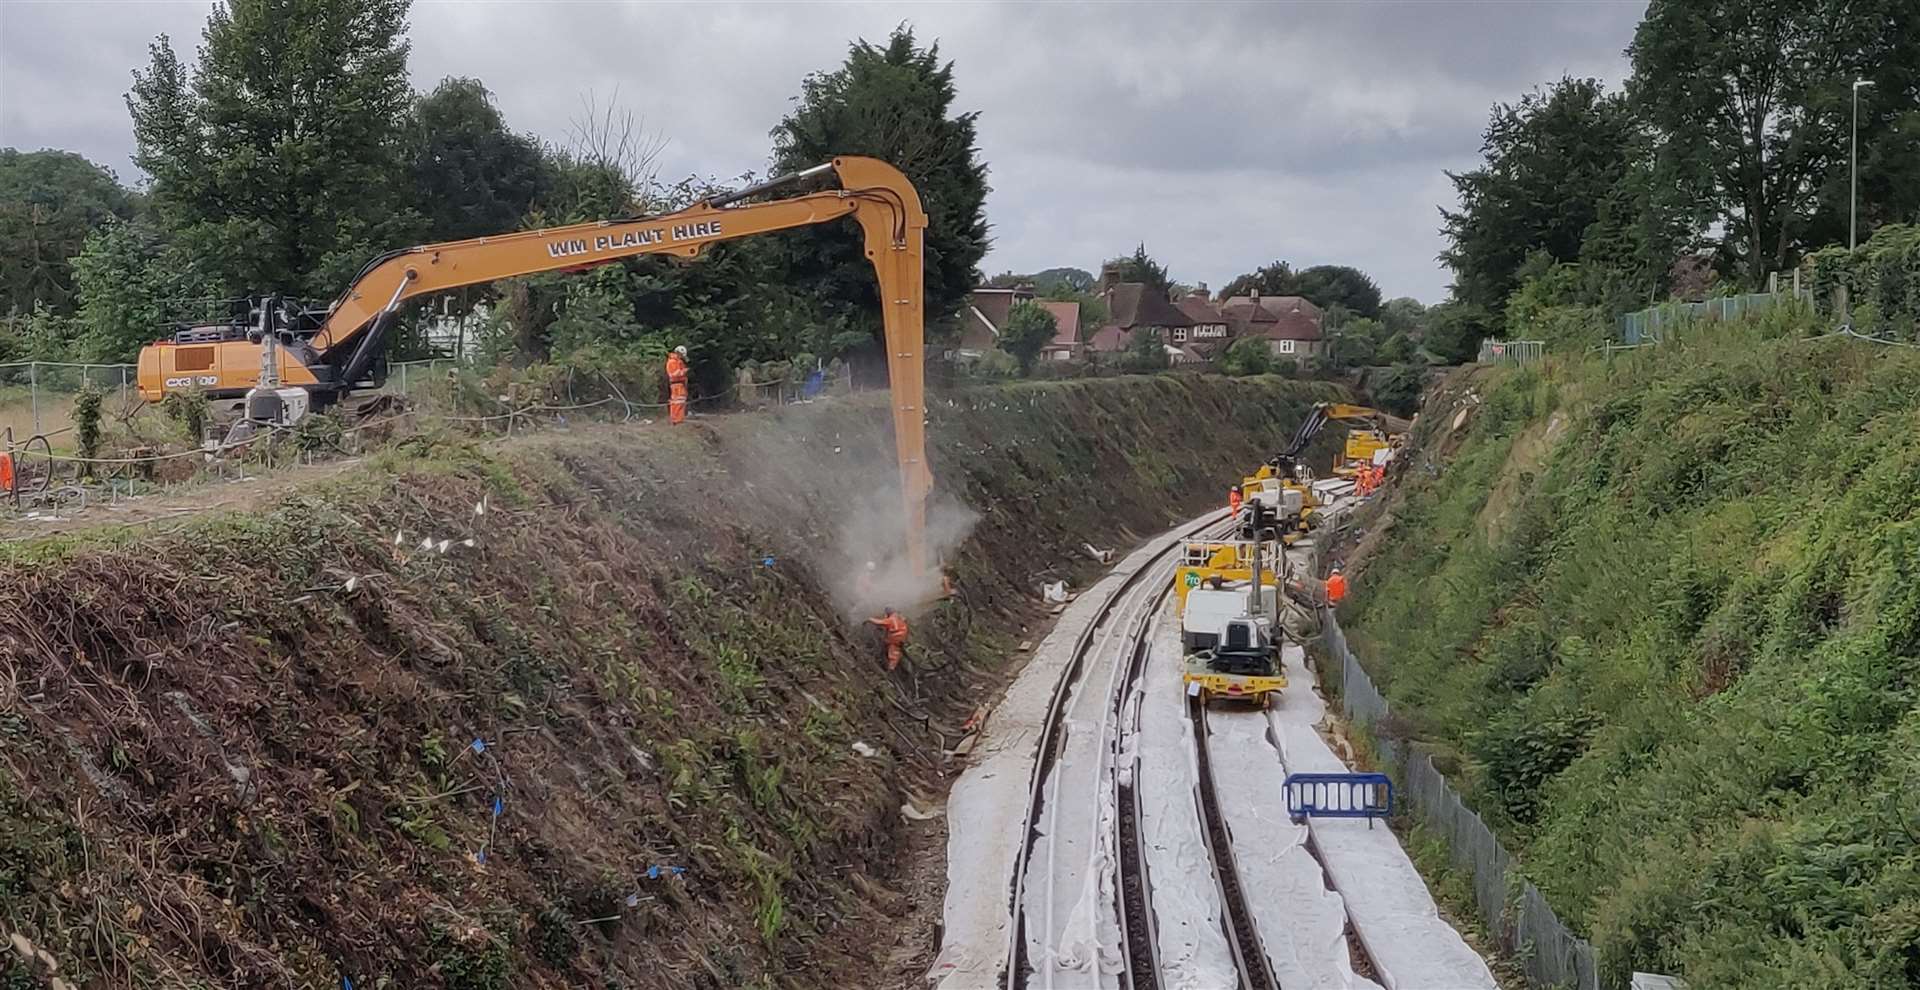 Landslide prevention works are taking place at Bearsted